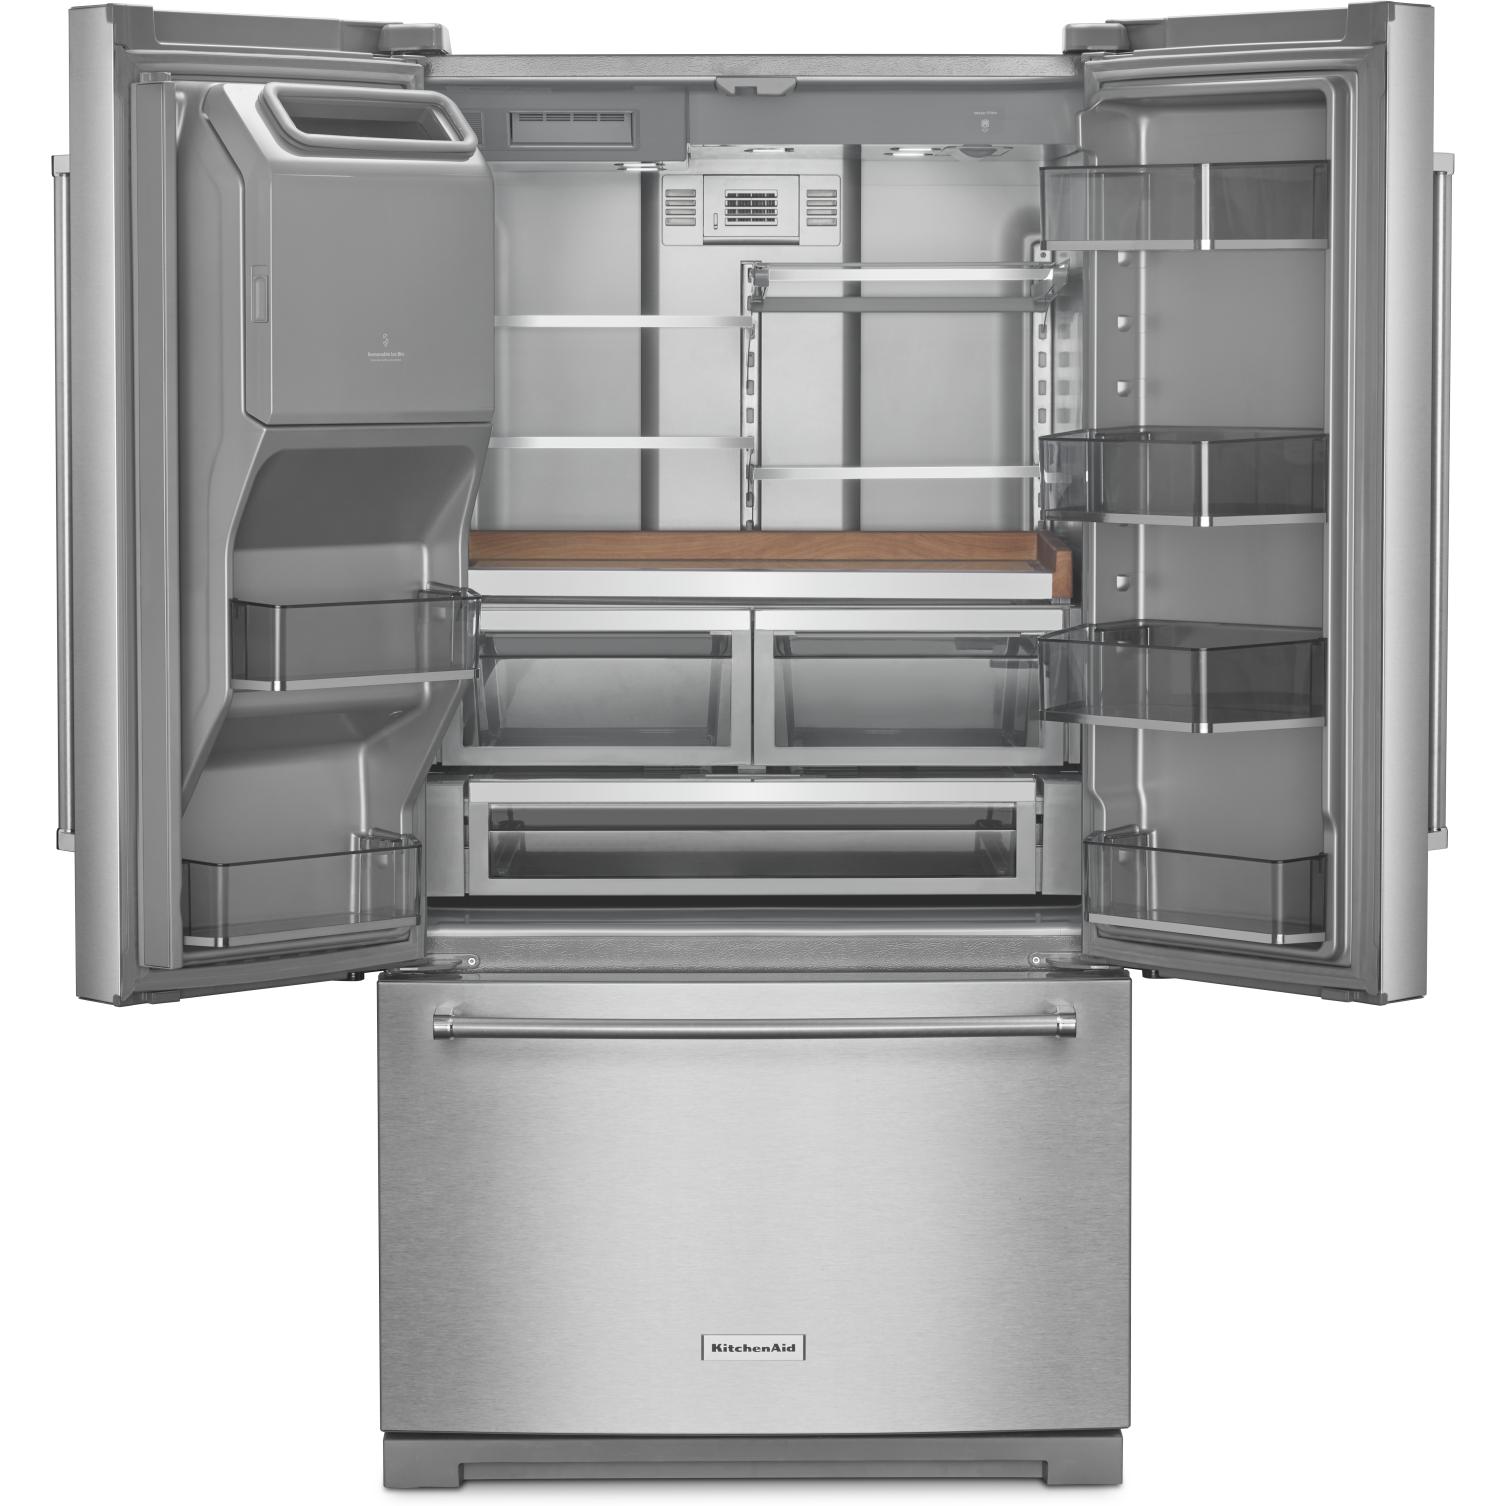 KitchenAid French 3-Door Refrigerator with External Water and Ice Dispensing System KRFF577KPS